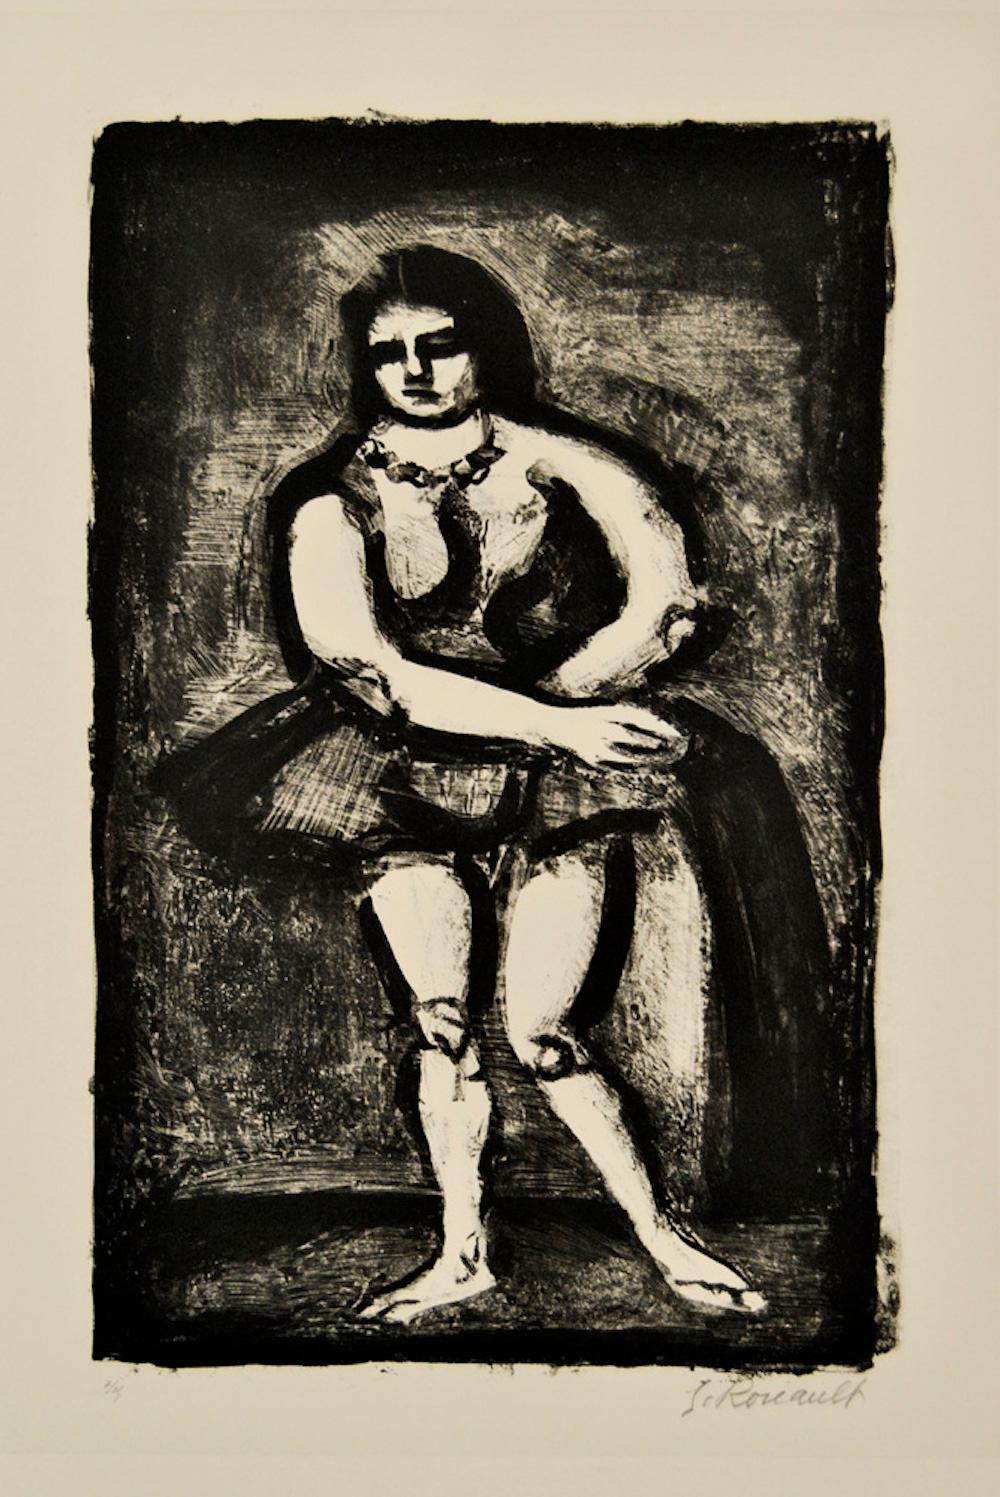 Georges Rouault Figurative Print - The Horsewoman - Original Lithograph by G. Rouault - 1926